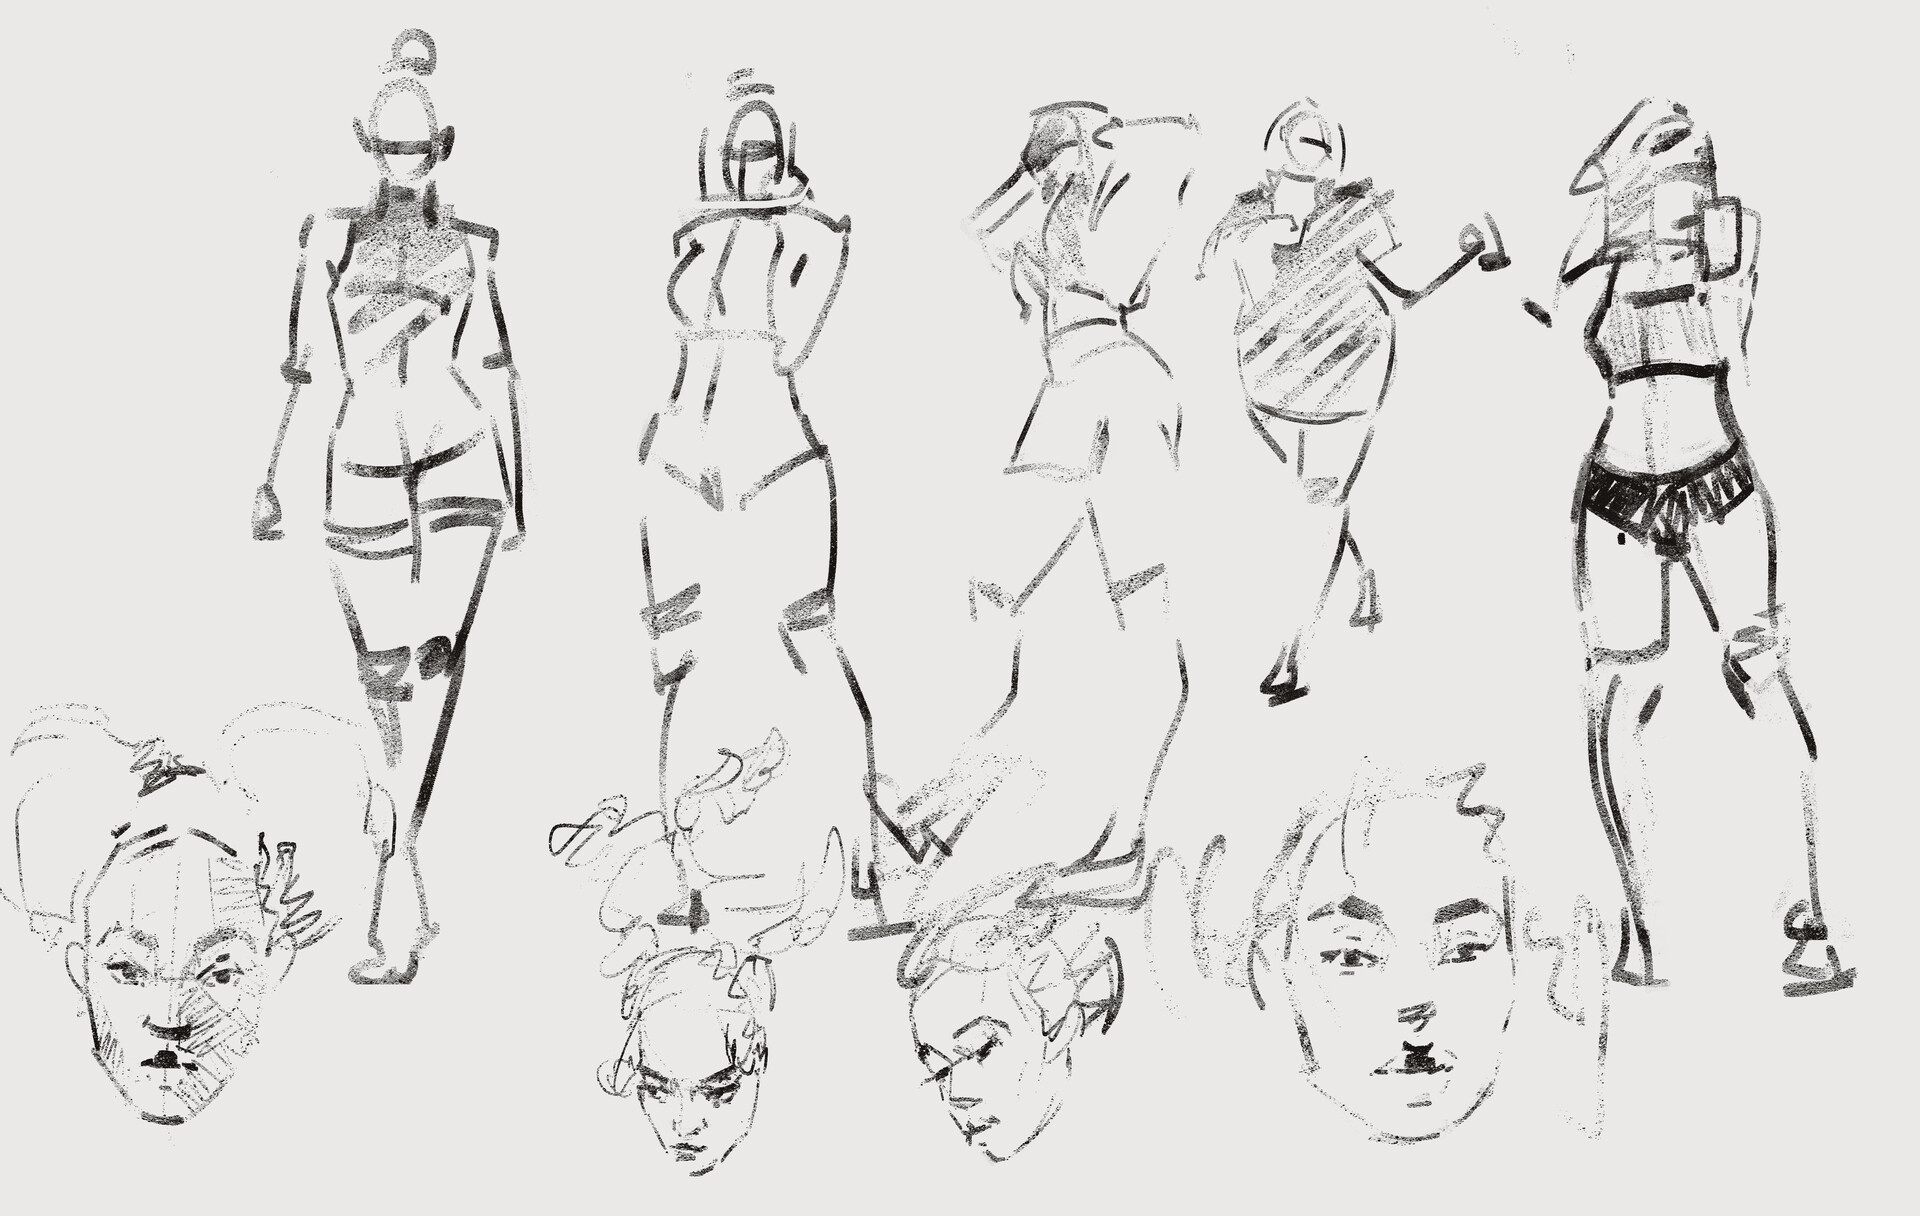 ArtStation - Daily sketches ( 매일 스케치 )